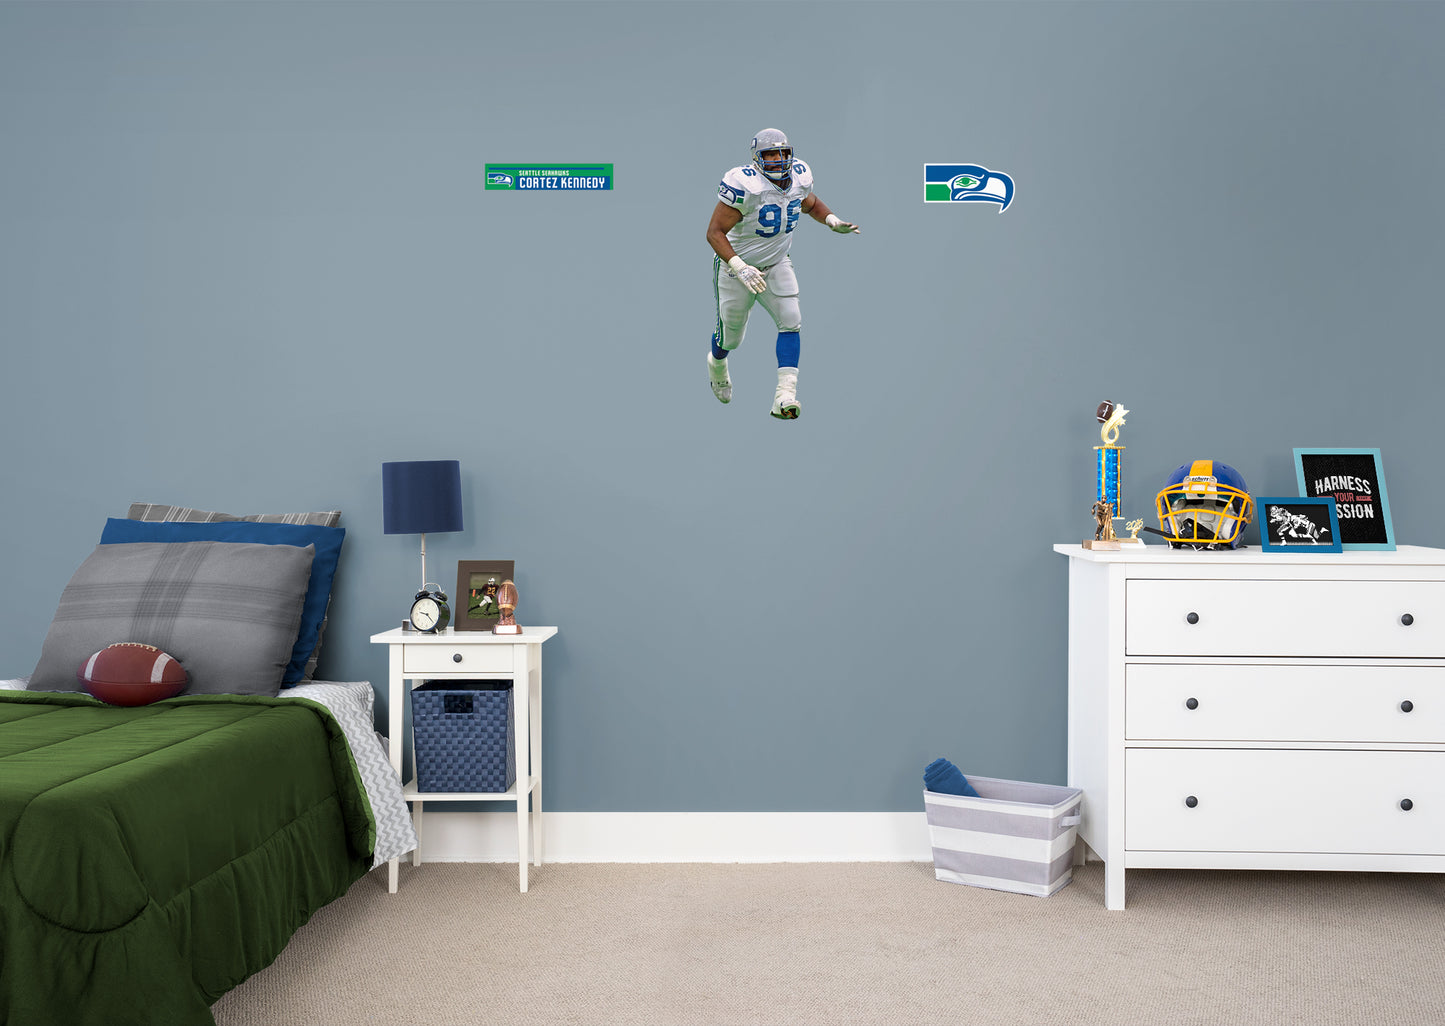 Seattle Seahawks: Cortez Kennedy  Legend        - Officially Licensed NFL Removable Wall   Adhesive Decal